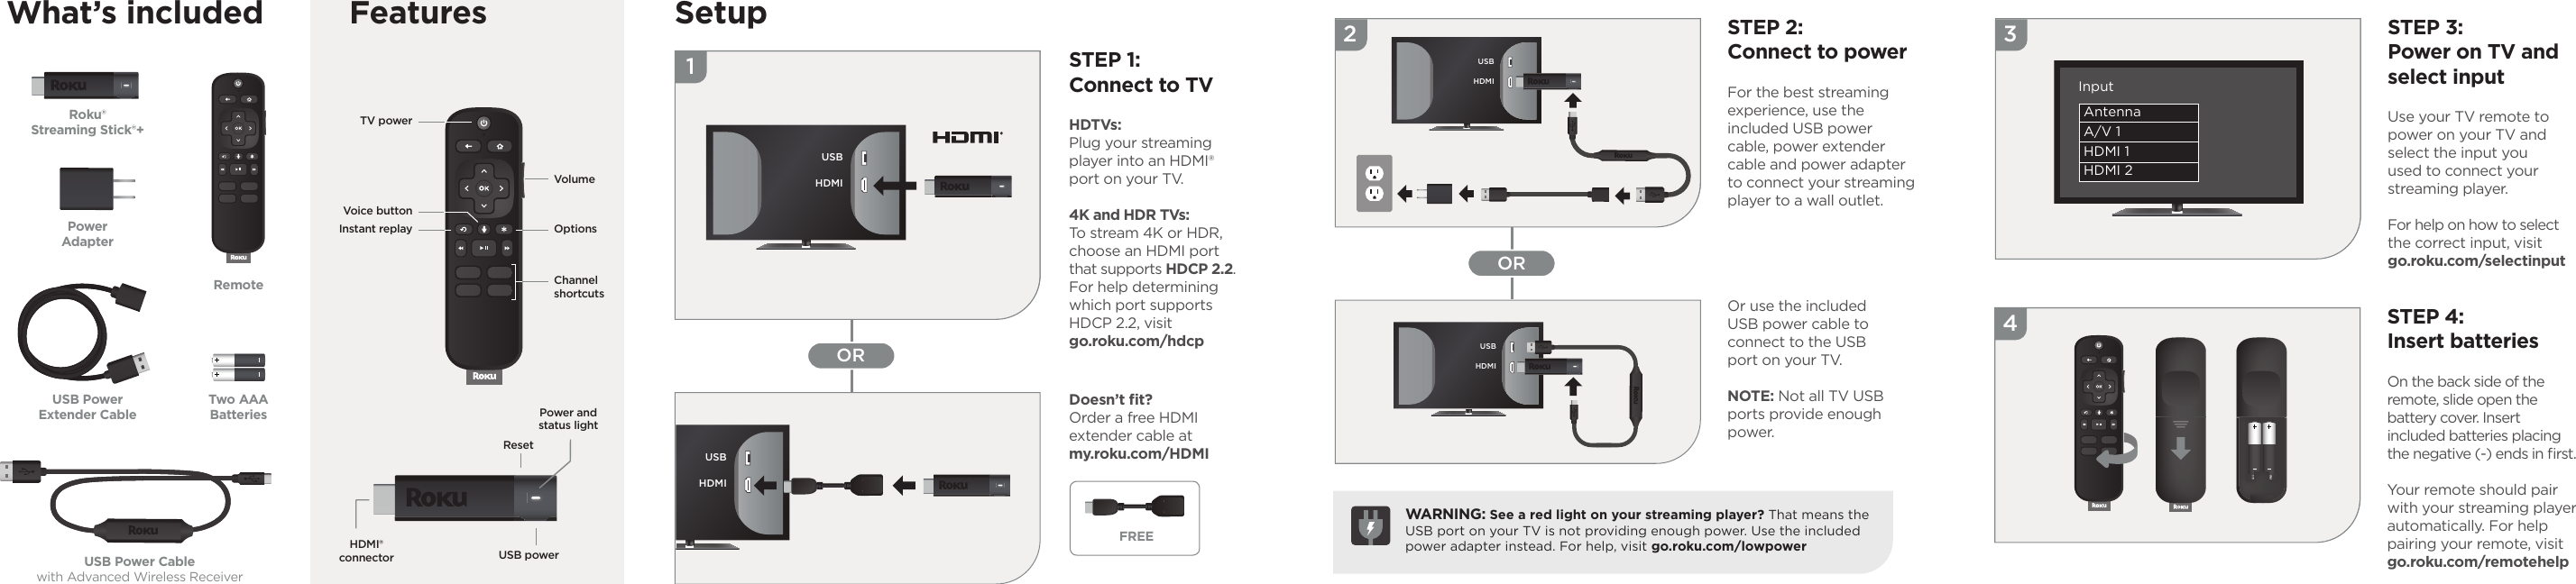 1OR342ORWhat’s included SetupSTEP 1:Connect to TVHDTVs: Plug your streaming player into an HDMI® port on your TV. 4K and HDR TVs: To stream 4K or HDR, choose an HDMI port that supports HDCP 2.2.For help determining which port supports HDCP 2.2, visit go.roku.com/hdcpSTEP 2:Connect to powerFor the best streamingexperience, use theincluded USB power cable, power extender cable and power adapter to connect your streaming player to a wall outlet.STEP 3:Power on TV and select inputUse your TV remote to power on your TV and  select the input you used to connect your streaming player.For help on how to select the correct input, visit go.roku.com/selectinputSTEP 4:Insert batteriesOn the back side of the remote, slide open the battery cover. Insert included batteries placing the negative (-) ends in ﬁ rst.Your remote should pair with your streaming player automatically. For help pairing your remote, visitgo.roku.com/remotehelpDoesn’t ﬁ t? Order a free HDMI extender cable at my.roku.com/HDMIOr use the included USB power cable to connect to the USB port on your TV. NOTE: Not all TV USB ports provide enough power.WARNING: See a red light on your streaming player? That means the USB port on your TV is not providing enough power. Use the included power adapter instead. For help, visit go.roku.com/lowpowerRoku®Streaming Stick®+USB Power Cablewith Advanced Wireless ReceiverPowerAdapterTwo AAABatteriesRemoteUSB PowerExtender Cable Power andstatus lightUSB powerResetHDMI®connectorUSBHDMIUSBHDMIUSBHDMIFREEUSBHDMIAntennaA/V 1HDMI 1HDMI 2InputVolumeChannelshortcutsOptionsTV power Instant replayVoice buttonFeatures